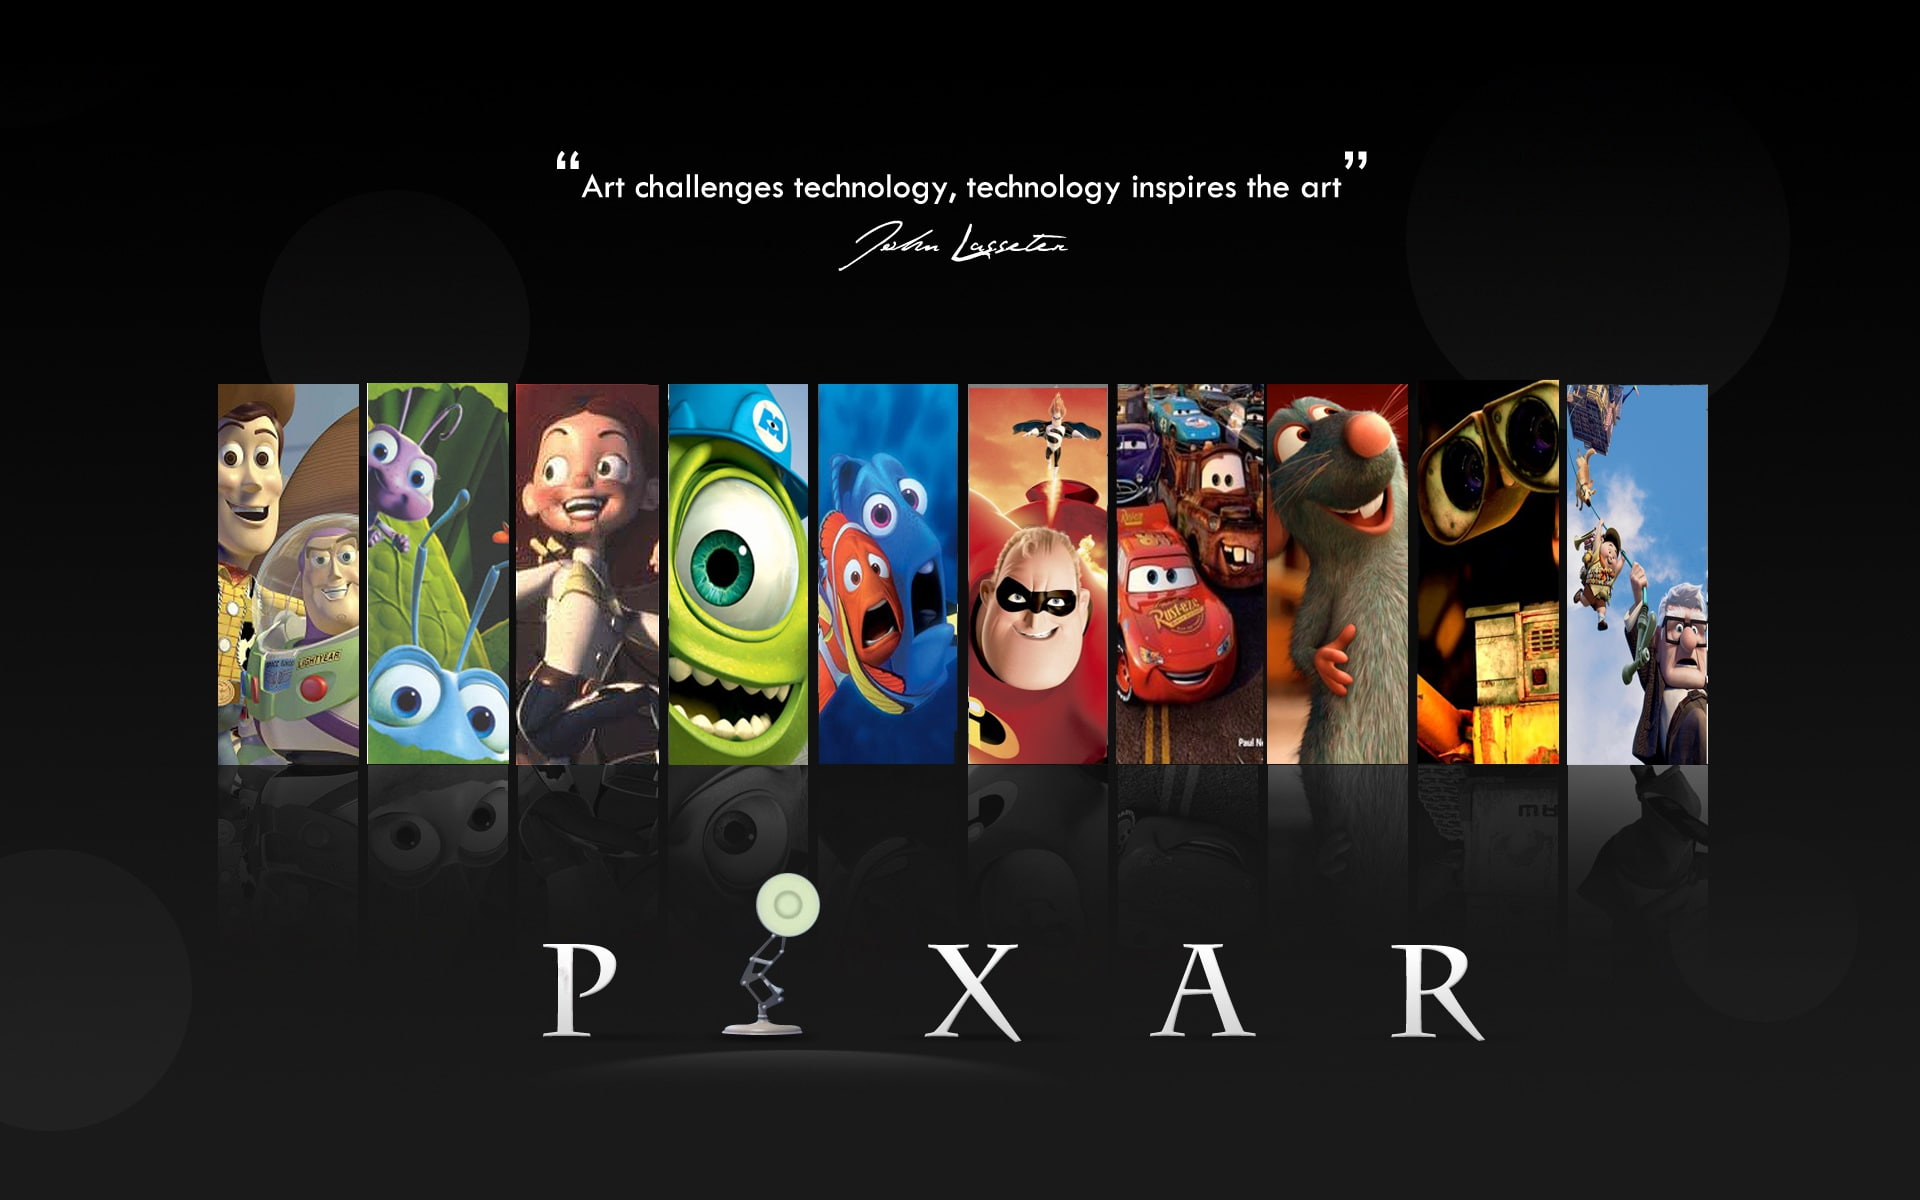 pixar disney company walle cars quotes up movie finding nemo monsters inc ratatouille toy story Entertainment Movies HD Art